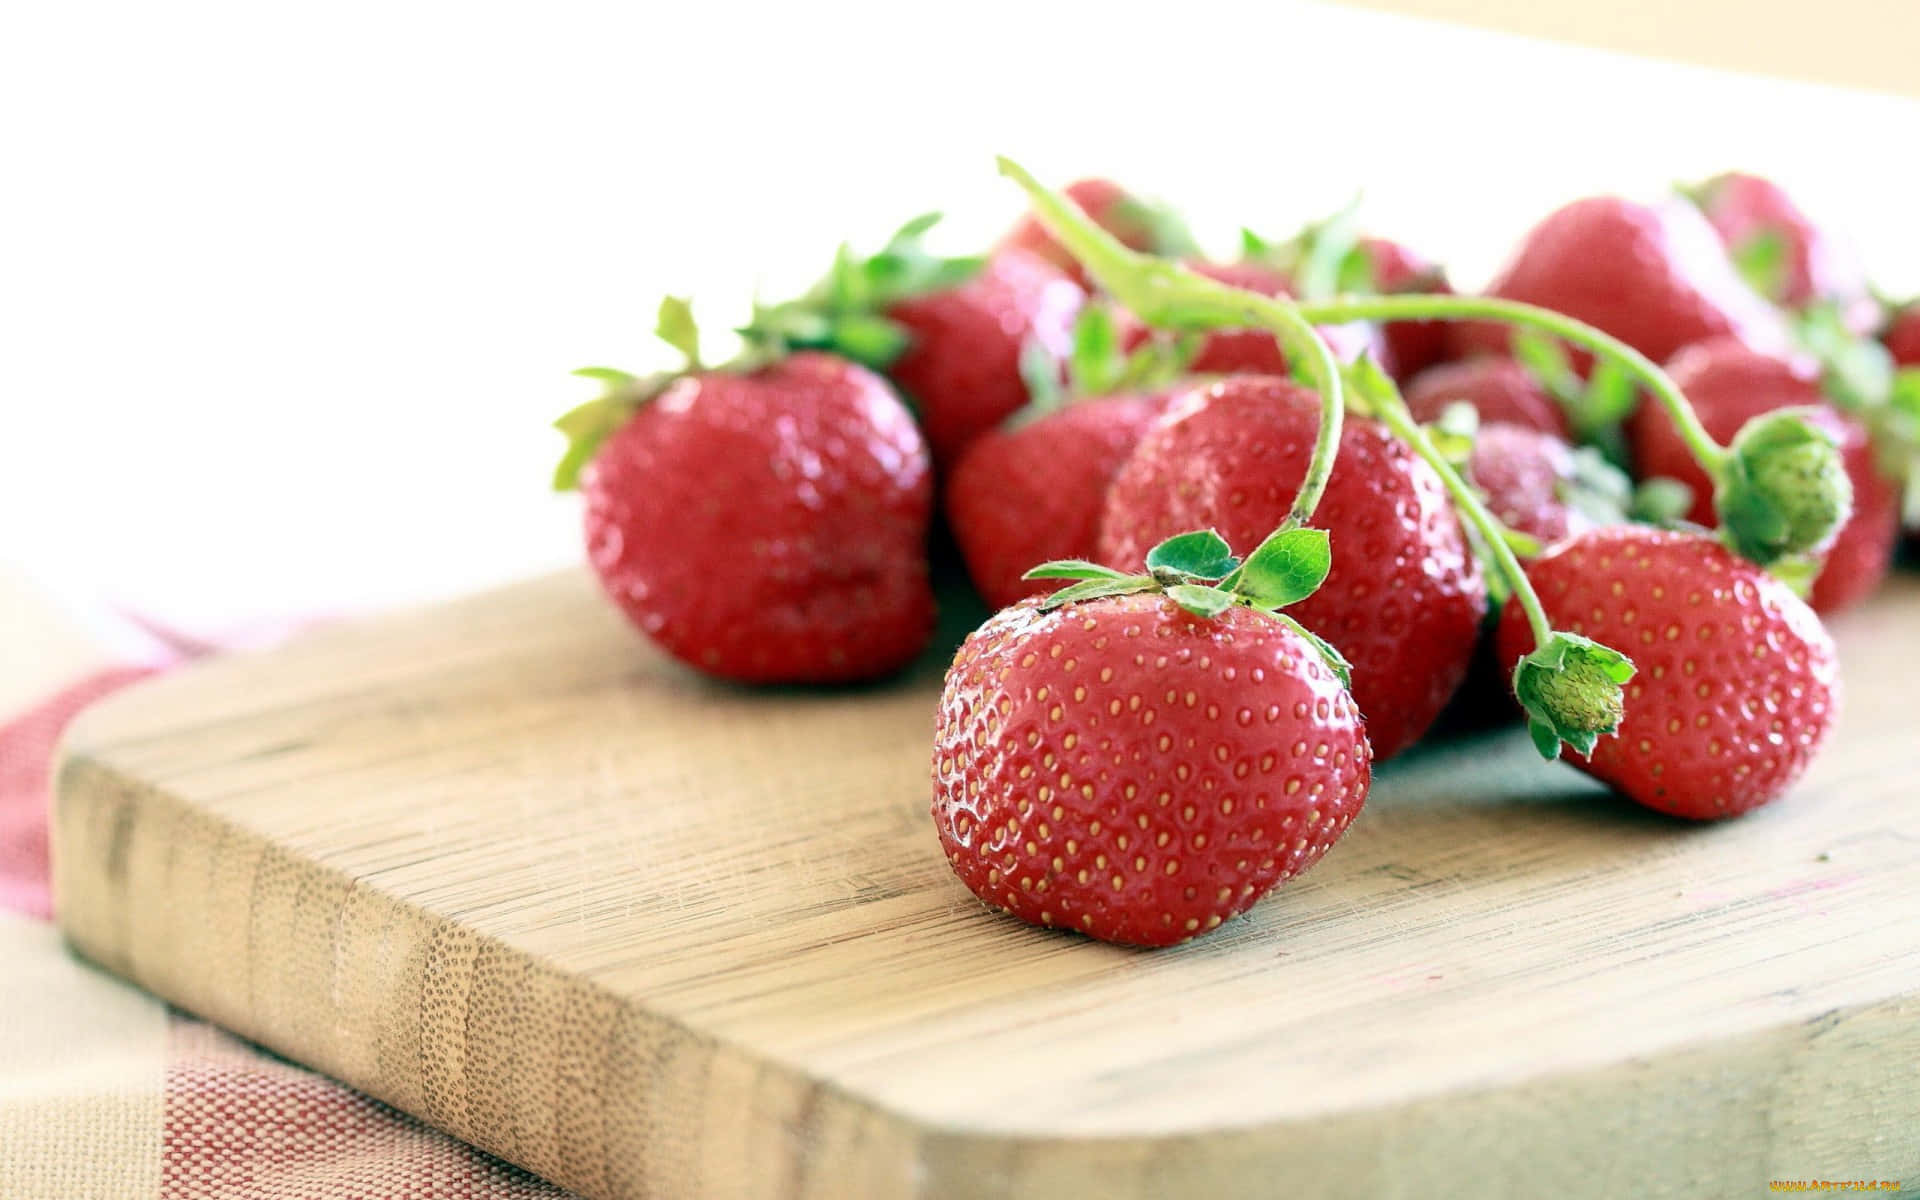 Bright red strawberries, ready to be enjoyed.